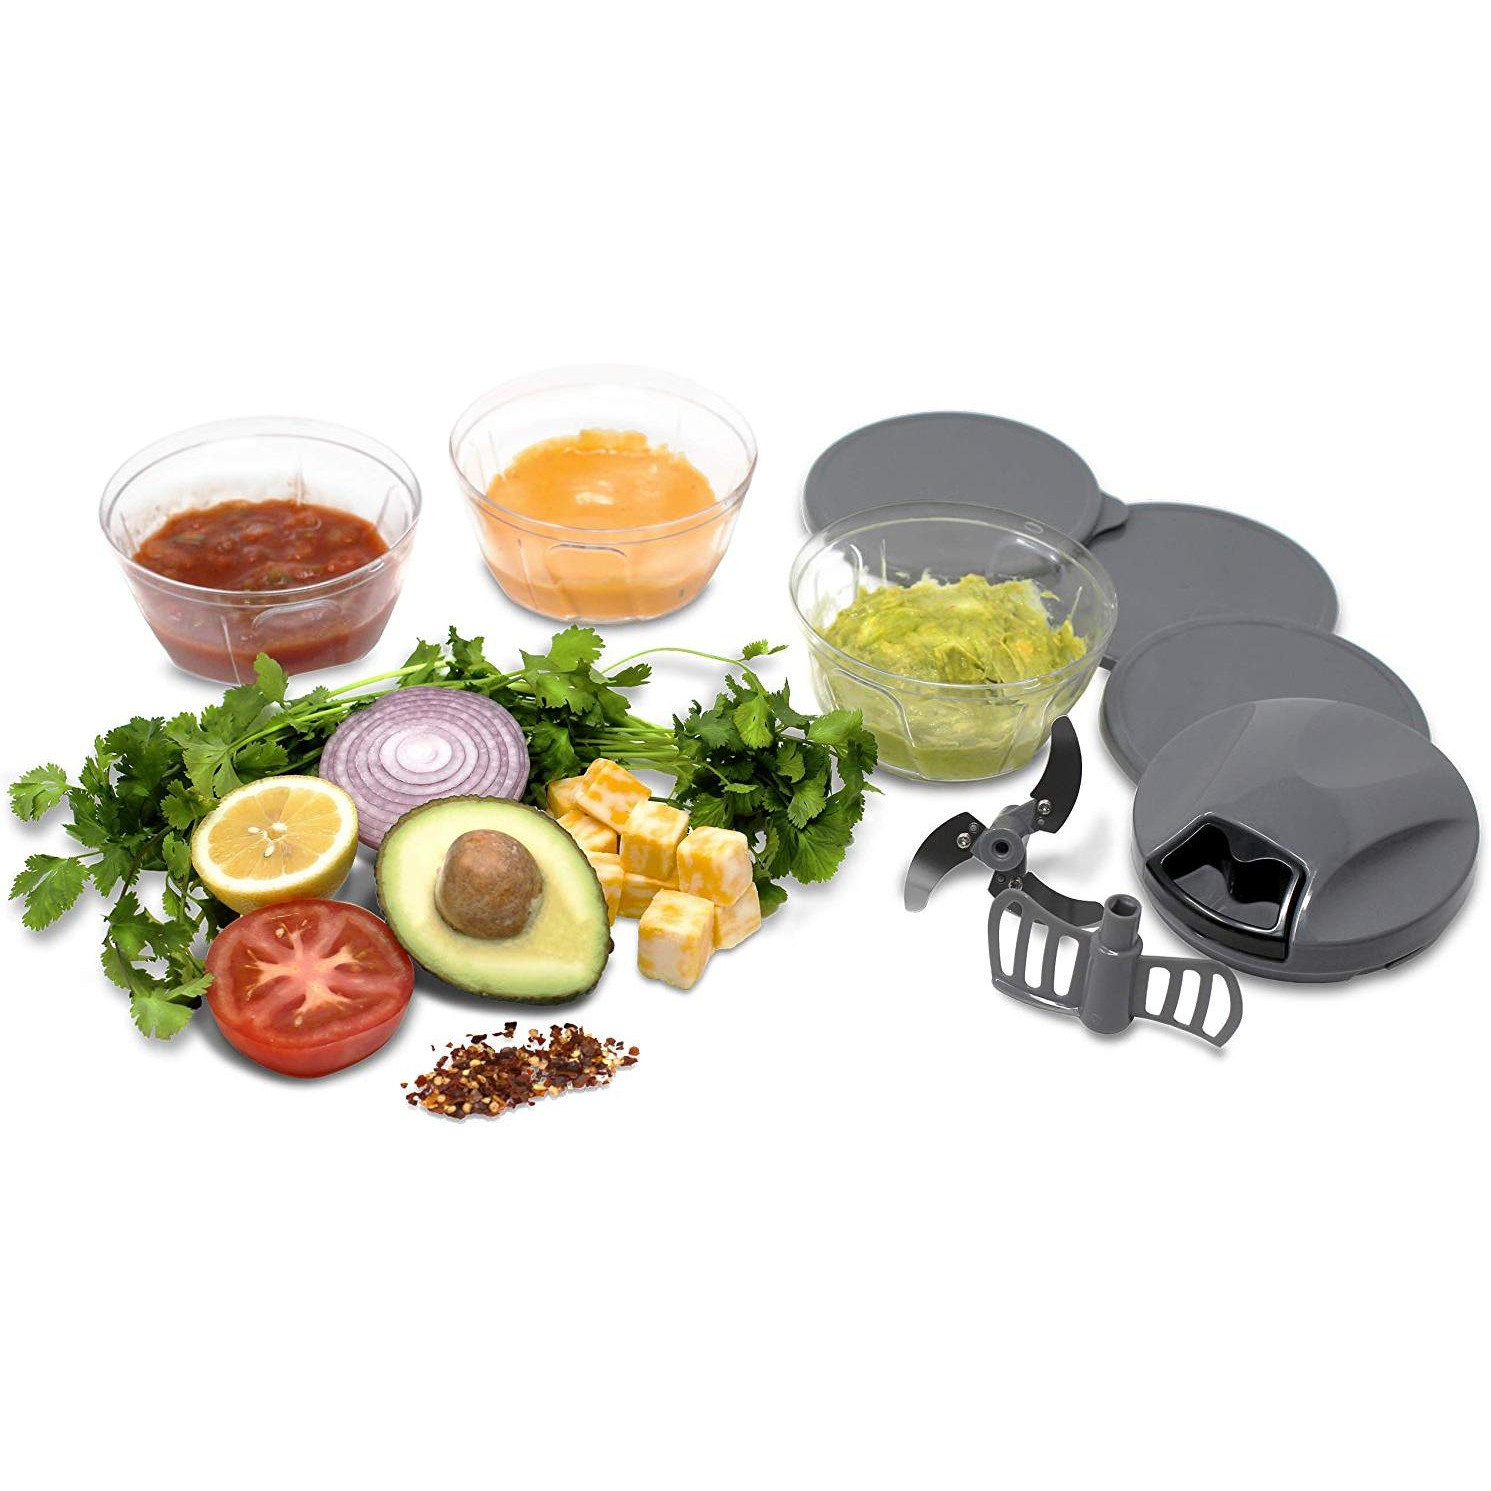 Tribowl Apache, Manual Pull Cord Food Chopper-blender, 3 bowls and lids 2  cup